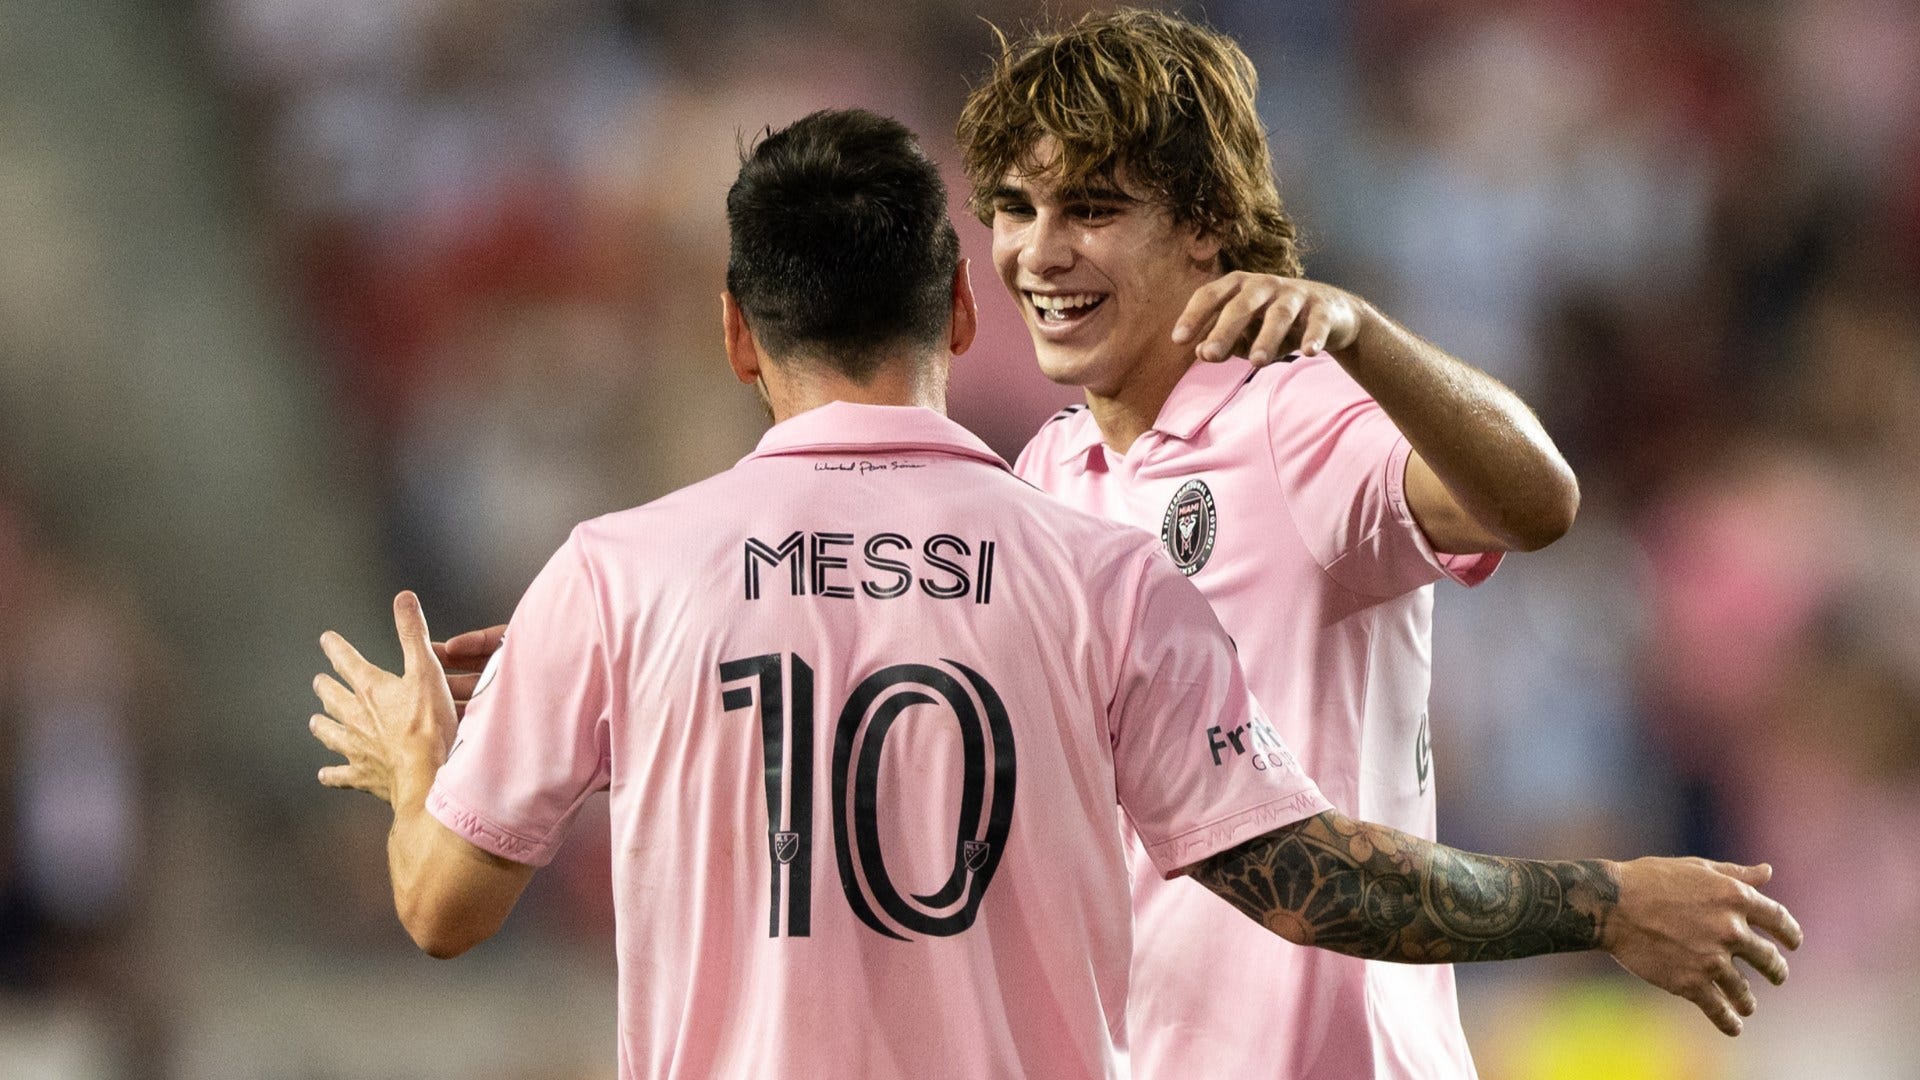 Playing with Lionel Messi is 'indescribable'! Inter Miami youngster Benjamin  Cremaschi opens on representing hometown club alongside Argentine legend |  Goal.com US